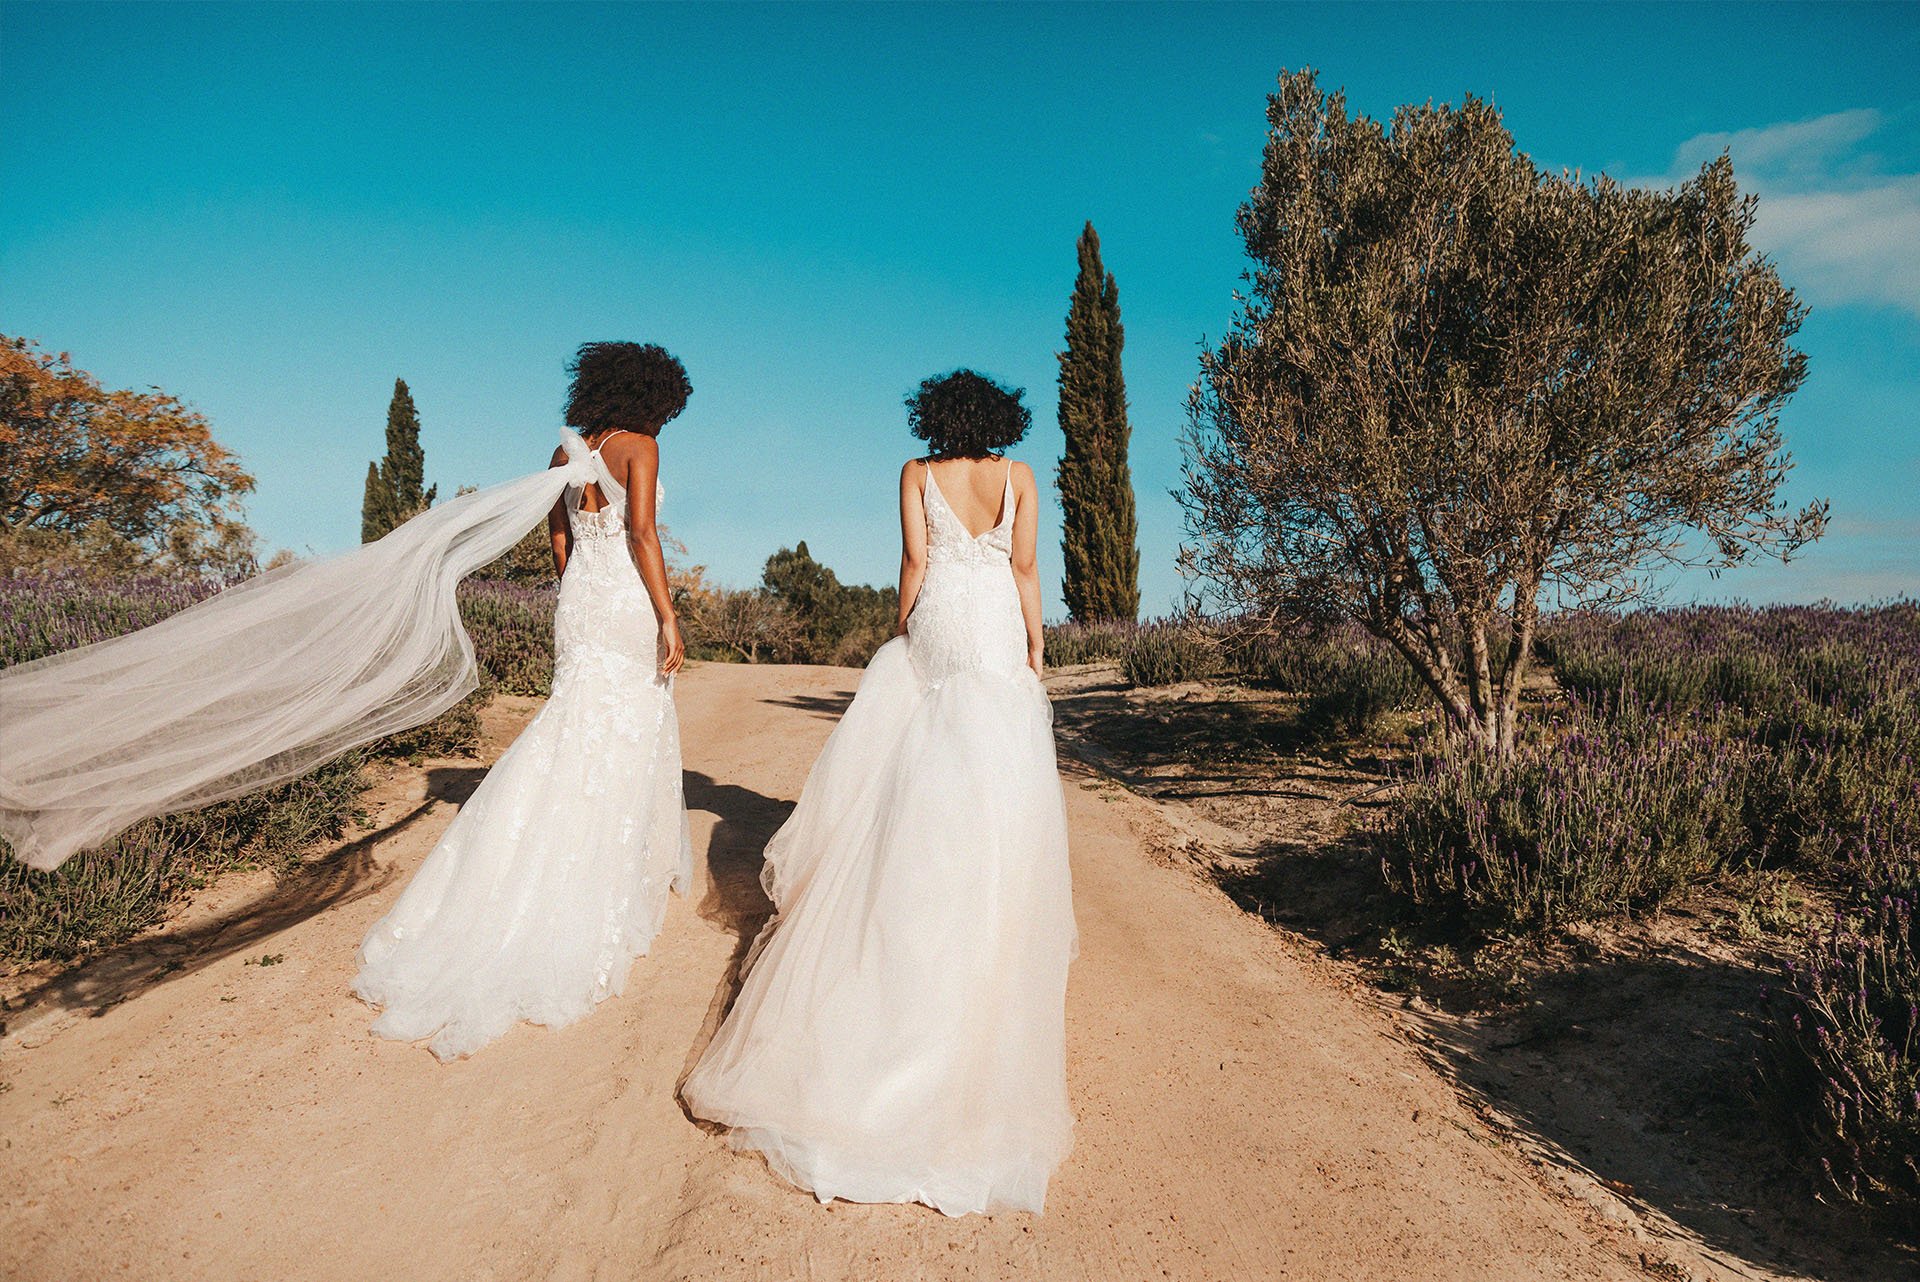 Two brides walking outsided